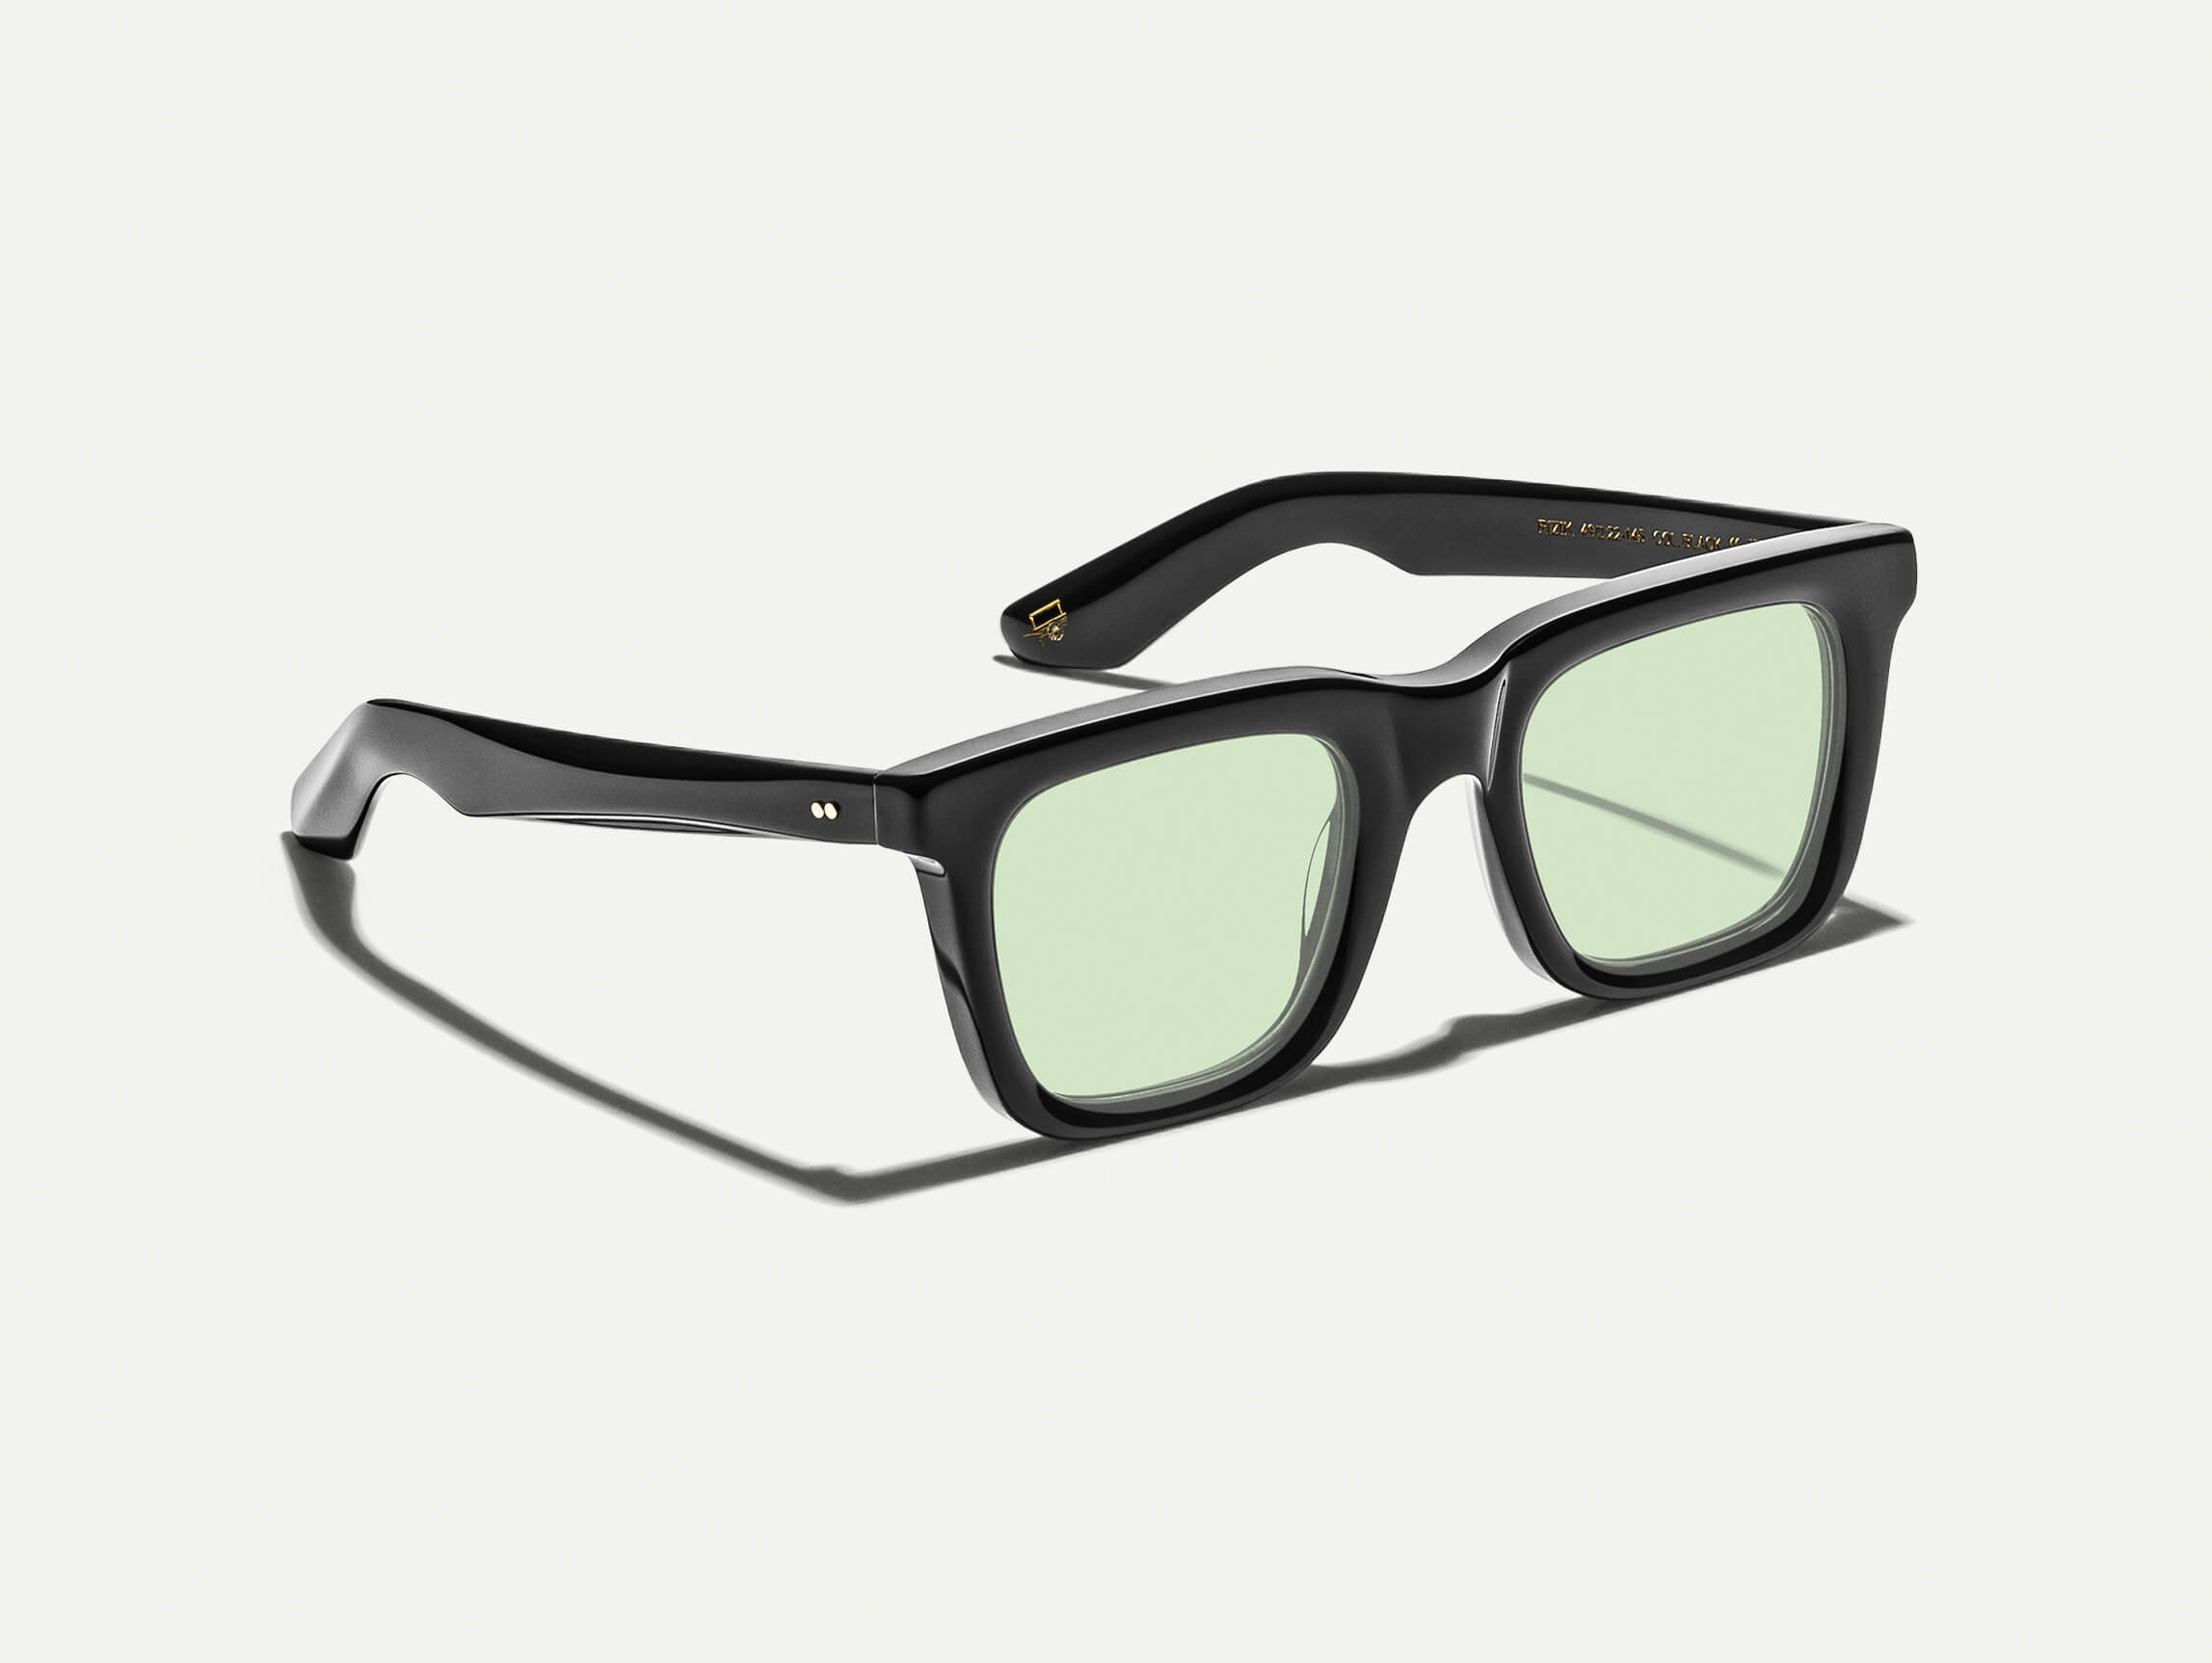 The RIZIK Black with Limelight Tinted Lenses